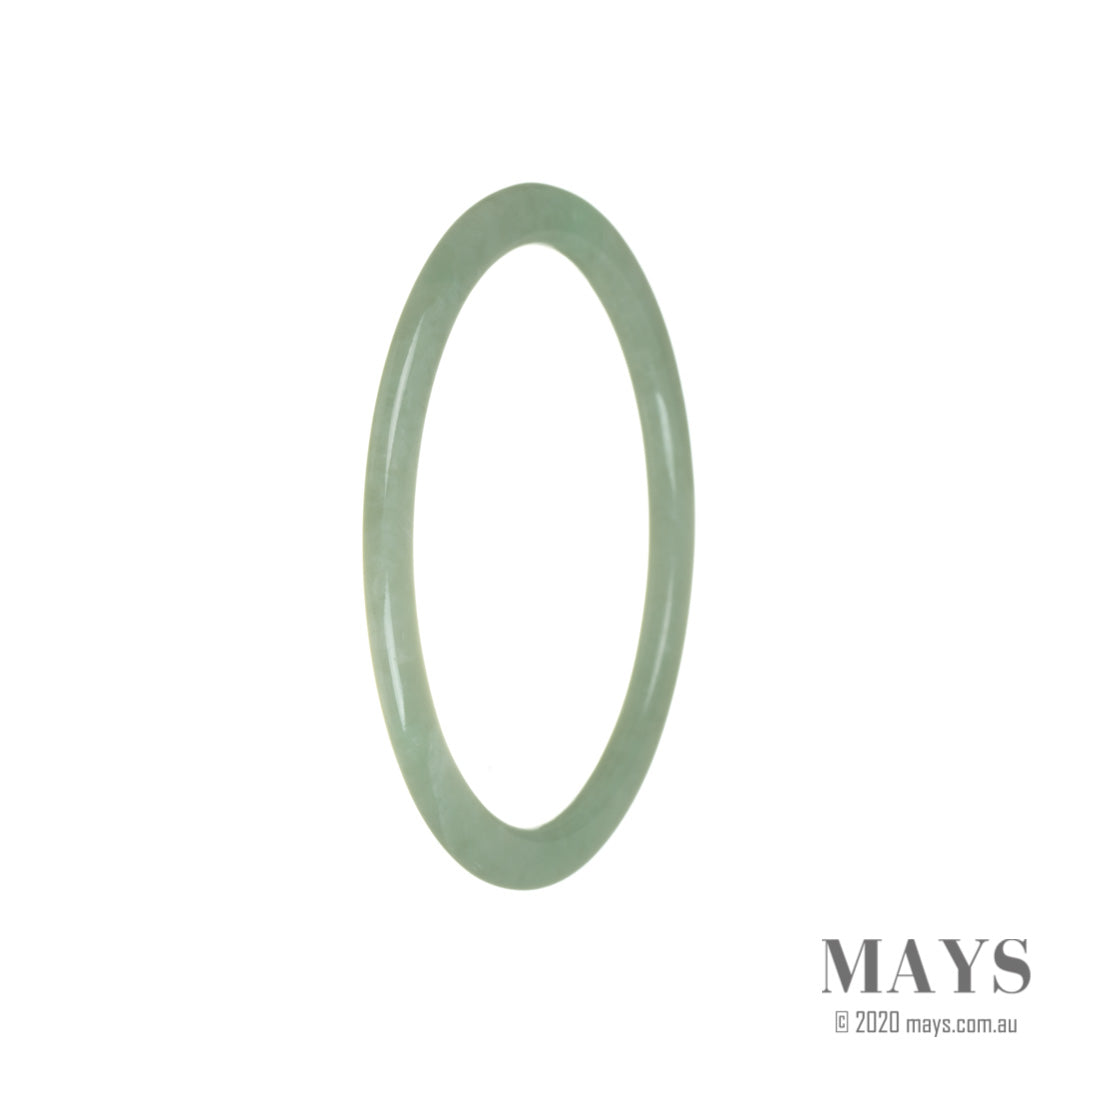 Close-up of a delicate, green Burma jade bracelet with a 59mm thin band.